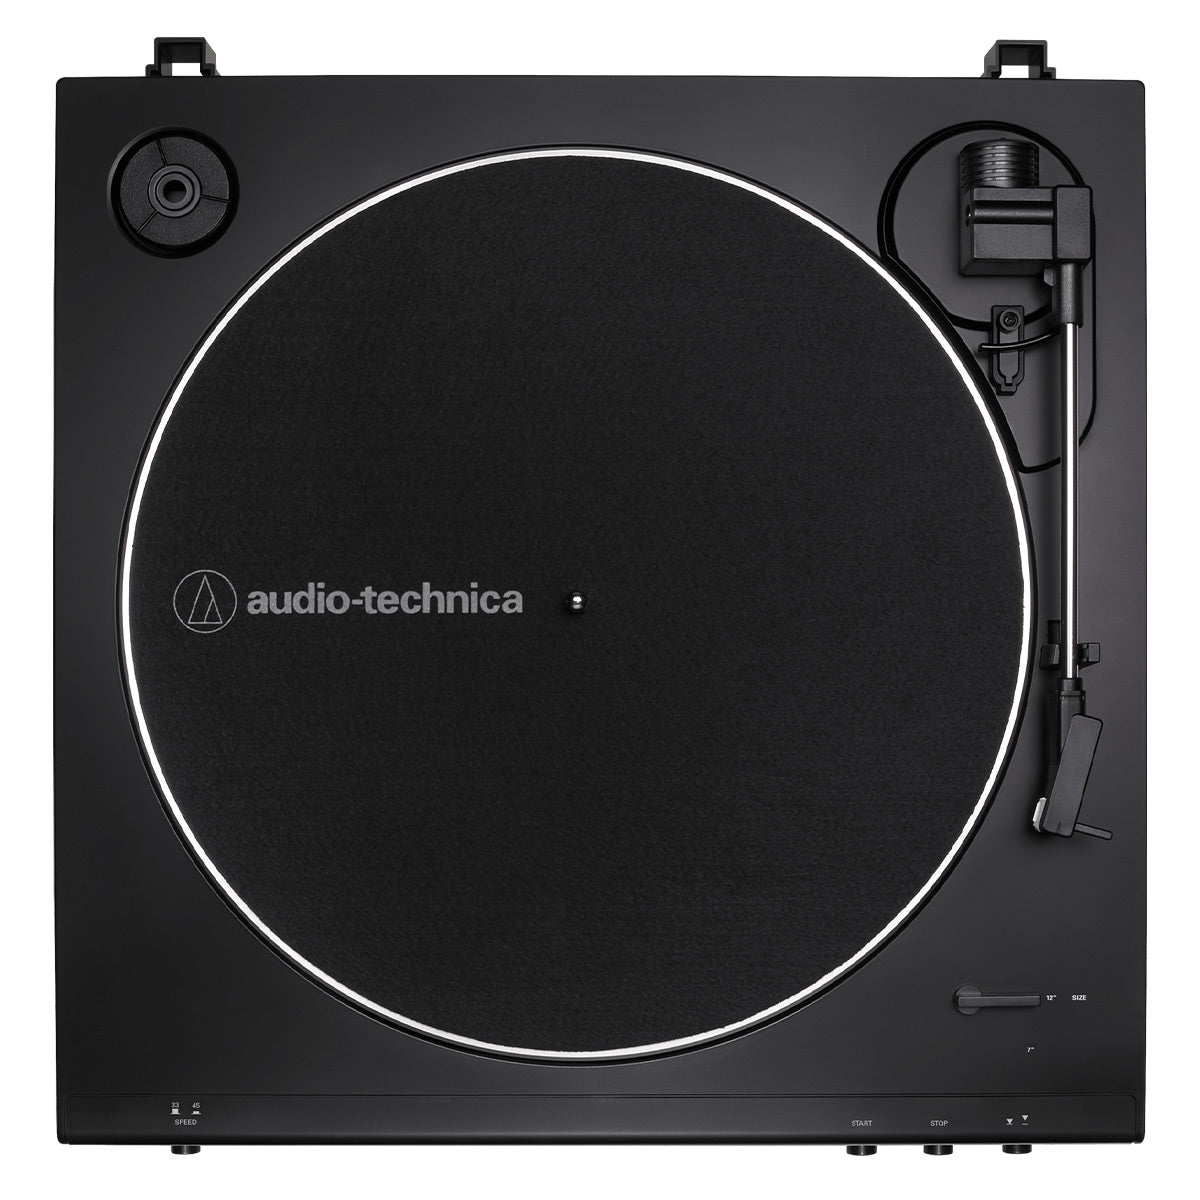 Audio-Technica AT-LP60X-BK Fully Automatic Belt-Drive Stereo Turntable (Black)